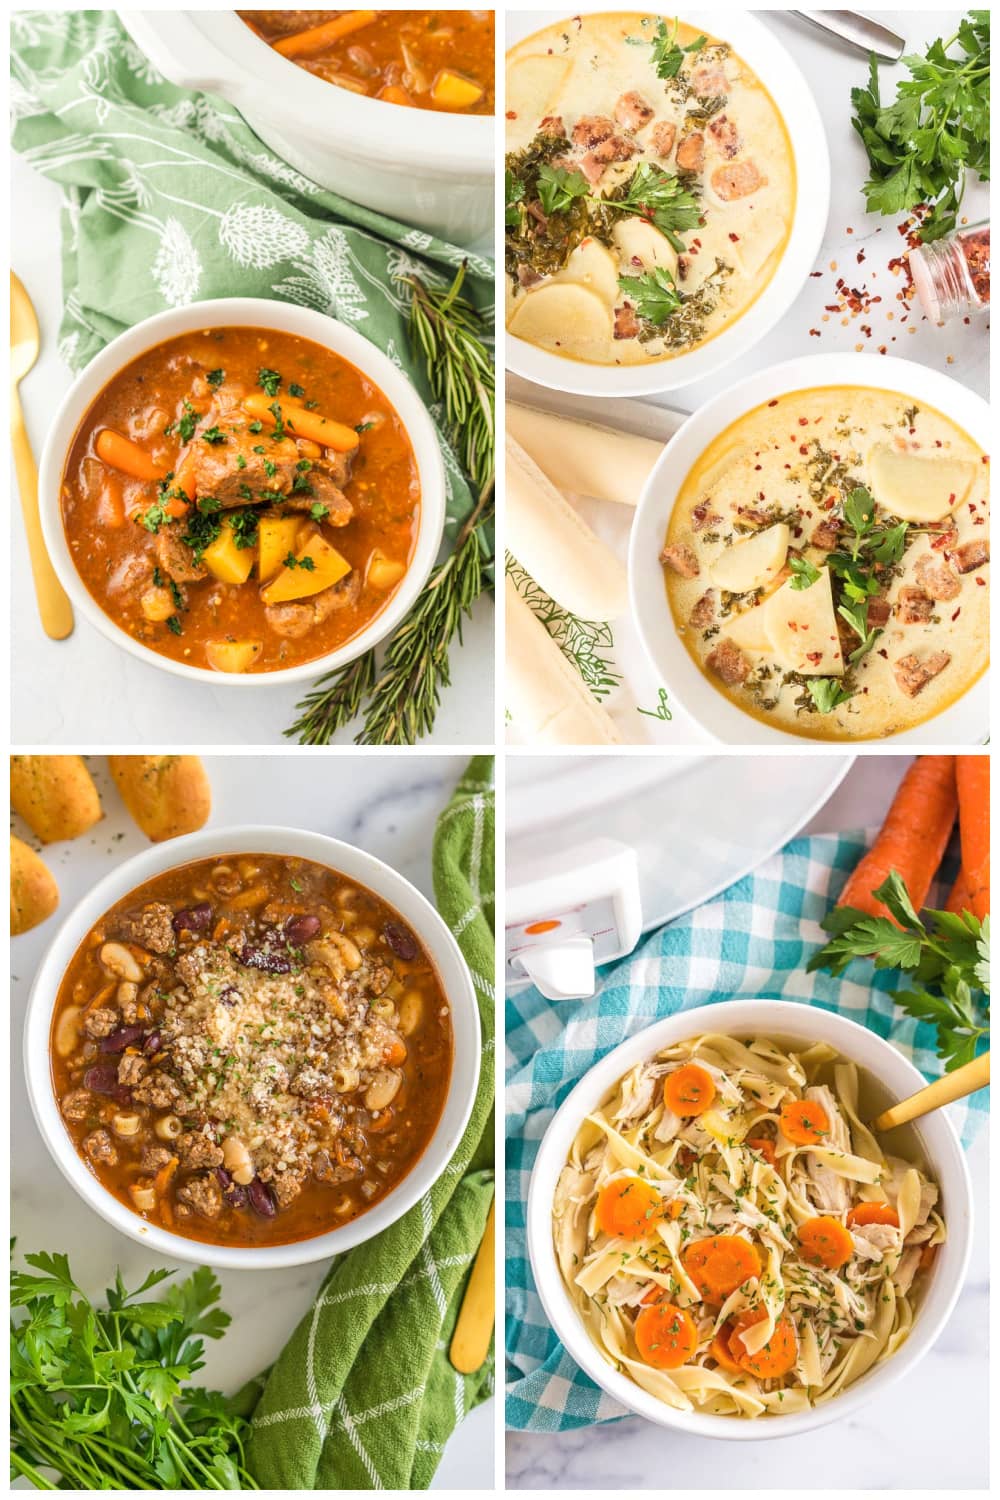 Easy Crockpot Soup Recipes: Cozy Meals for Cold Days